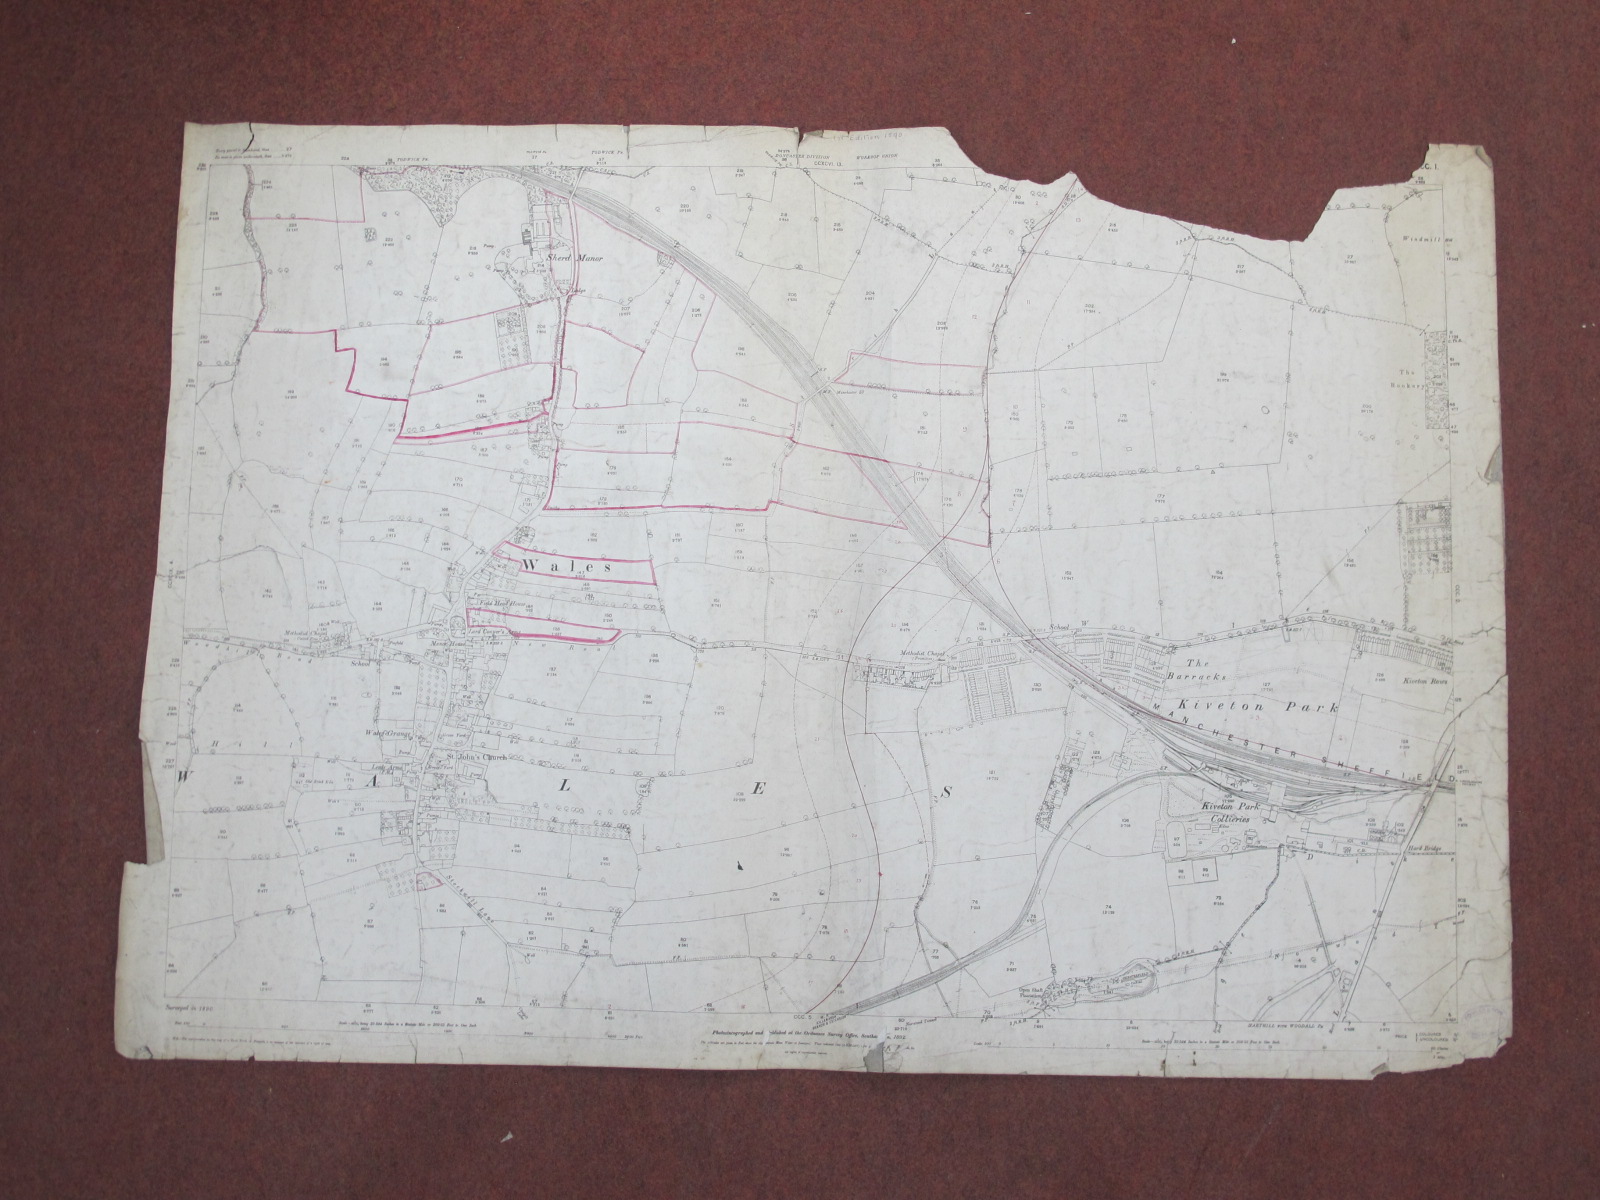 West Riding Yorkshire Maps, Rotherham, Treeton, North Anston and area - some dates noted 1931, 1935, - Image 5 of 10